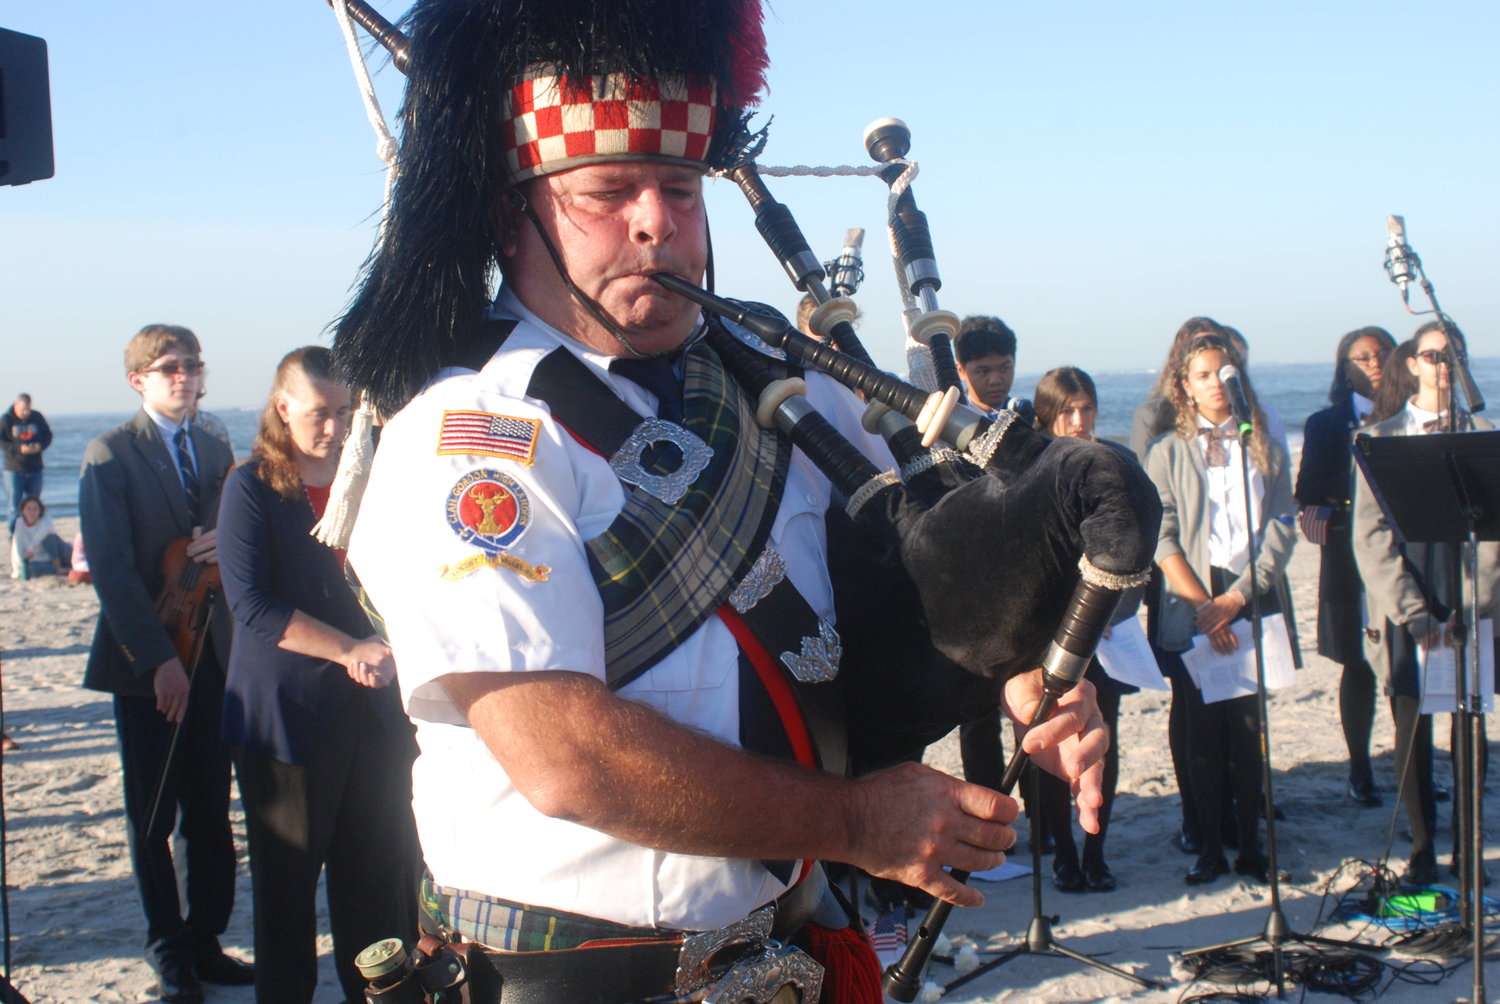 Bagpiper Charlie Armstrong, of the Clan Gordon Highlanders of Locust Valley, led the color guard during the ceremony.